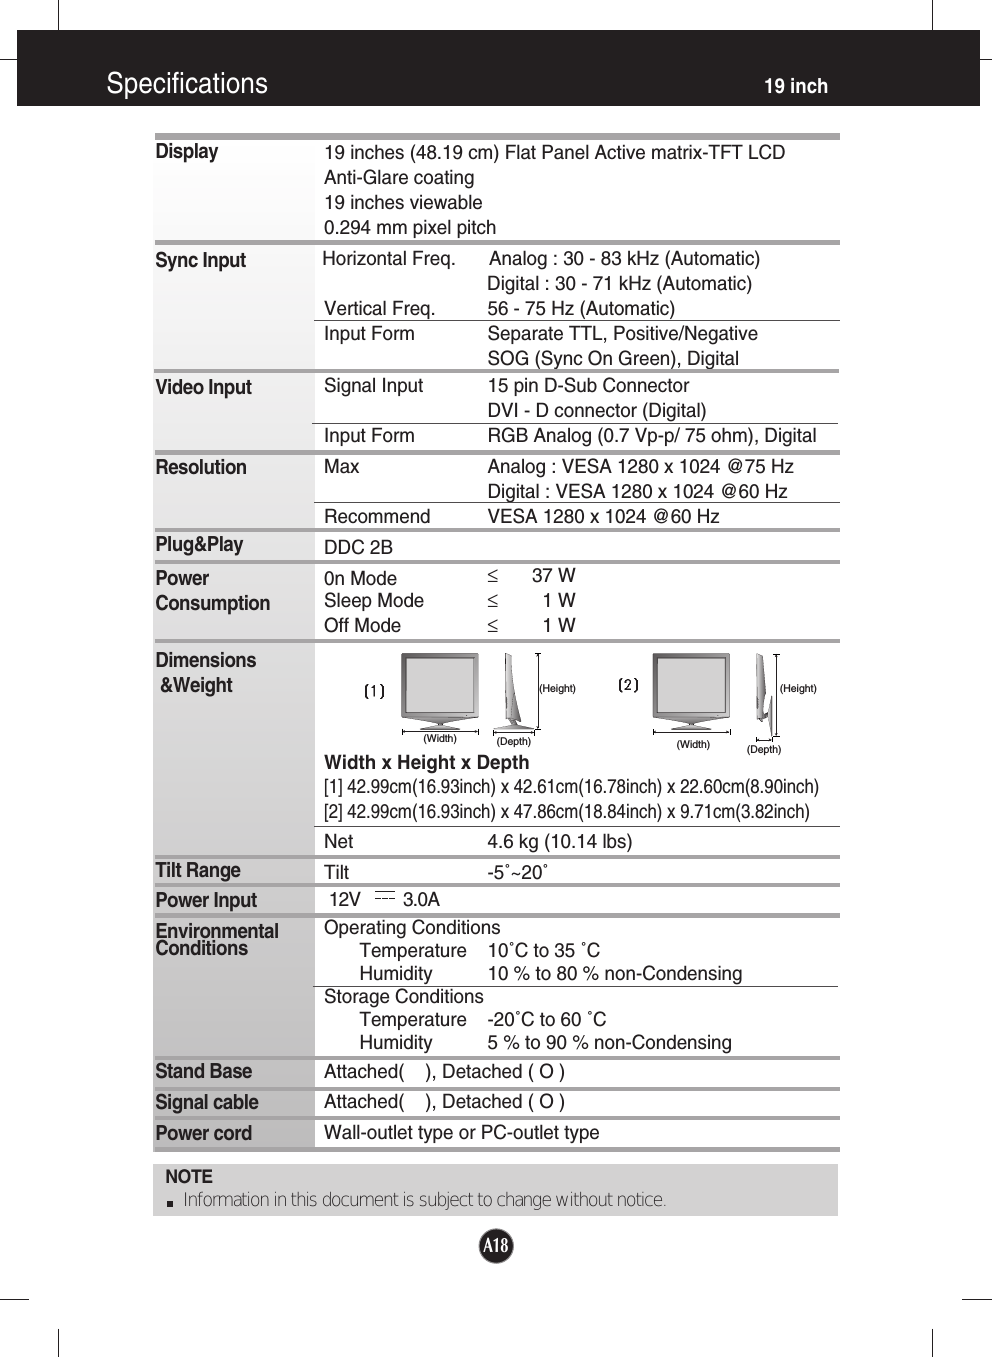 A18Specifications                                                                    19 inchNOTEInformation in this document is subject to change without notice.DisplaySync InputVideo InputResolutionPlug&amp;PlayPowerConsumptionDimensions&amp;WeightTilt RangePower InputEnvironmentalConditionsStand BaseSignal cablePower cord 19 inches (48.19 cm) Flat Panel Active matrix-TFT LCD Anti-Glare coating19 inches viewable0.294 mm pixel pitchHorizontal Freq. Analog : 30 - 83 kHz (Automatic)Digital : 30 - 71 kHz (Automatic)Vertical Freq. 56 - 75 Hz (Automatic)Input Form Separate TTL, Positive/NegativeSOG (Sync On Green), DigitalSignal Input 15 pin D-Sub ConnectorDVI - D connector (Digital)Input Form RGB Analog (0.7 Vp-p/ 75 ohm), DigitalMax Analog : VESA 1280 x 1024 @75 HzDigital : VESA 1280 x 1024 @60 HzRecommend VESA 1280 x 1024 @60 HzDDC 2B0n Mode ≤37 WSleep Mode ≤1 WOff Mode ≤1 WWidth x Height x Depth[1] 42.99cm(16.93inch) x 42.61cm(16.78inch) x 22.60cm(8.90inch)[2] 42.99cm(16.93inch) x 47.86cm(18.84inch) x 9.71cm(3.82inch)Net 4.6 kg (10.14 lbs)Tilt -5˚~20˚12V         3.0AOperating ConditionsTemperature 10˚C to 35 ˚CHumidity 10 % to 80 % non-CondensingStorage ConditionsTemperature -20˚C to 60 ˚CHumidity 5 % to 90 % non-CondensingAttached(    ), Detached ( O )Attached(    ), Detached ( O )Wall-outlet type or PC-outlet typeSOURCESOURCEMENUMENUSET/AUTOSET/AUTOEngineEngine(Width) (Depth)(Height)SOURCESOURCEMENUMENUSET/AUTOSET/AUTOEngineEngine(Width) (Depth)(Height)